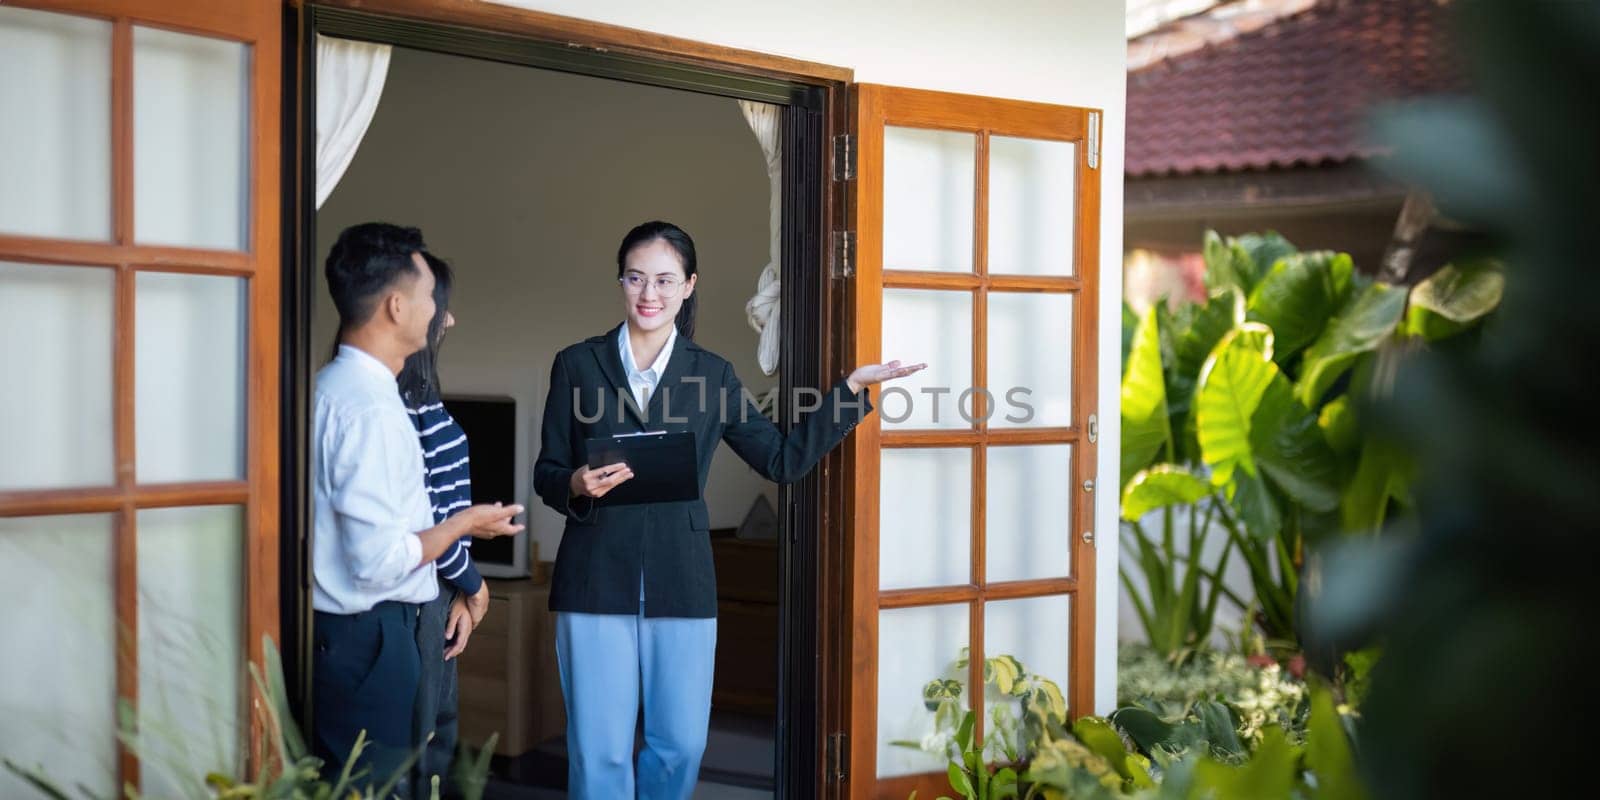 Couple lover with real estate agent visiting house for sale. husband and wife who plan property investment looking at lovely modern spacious home.